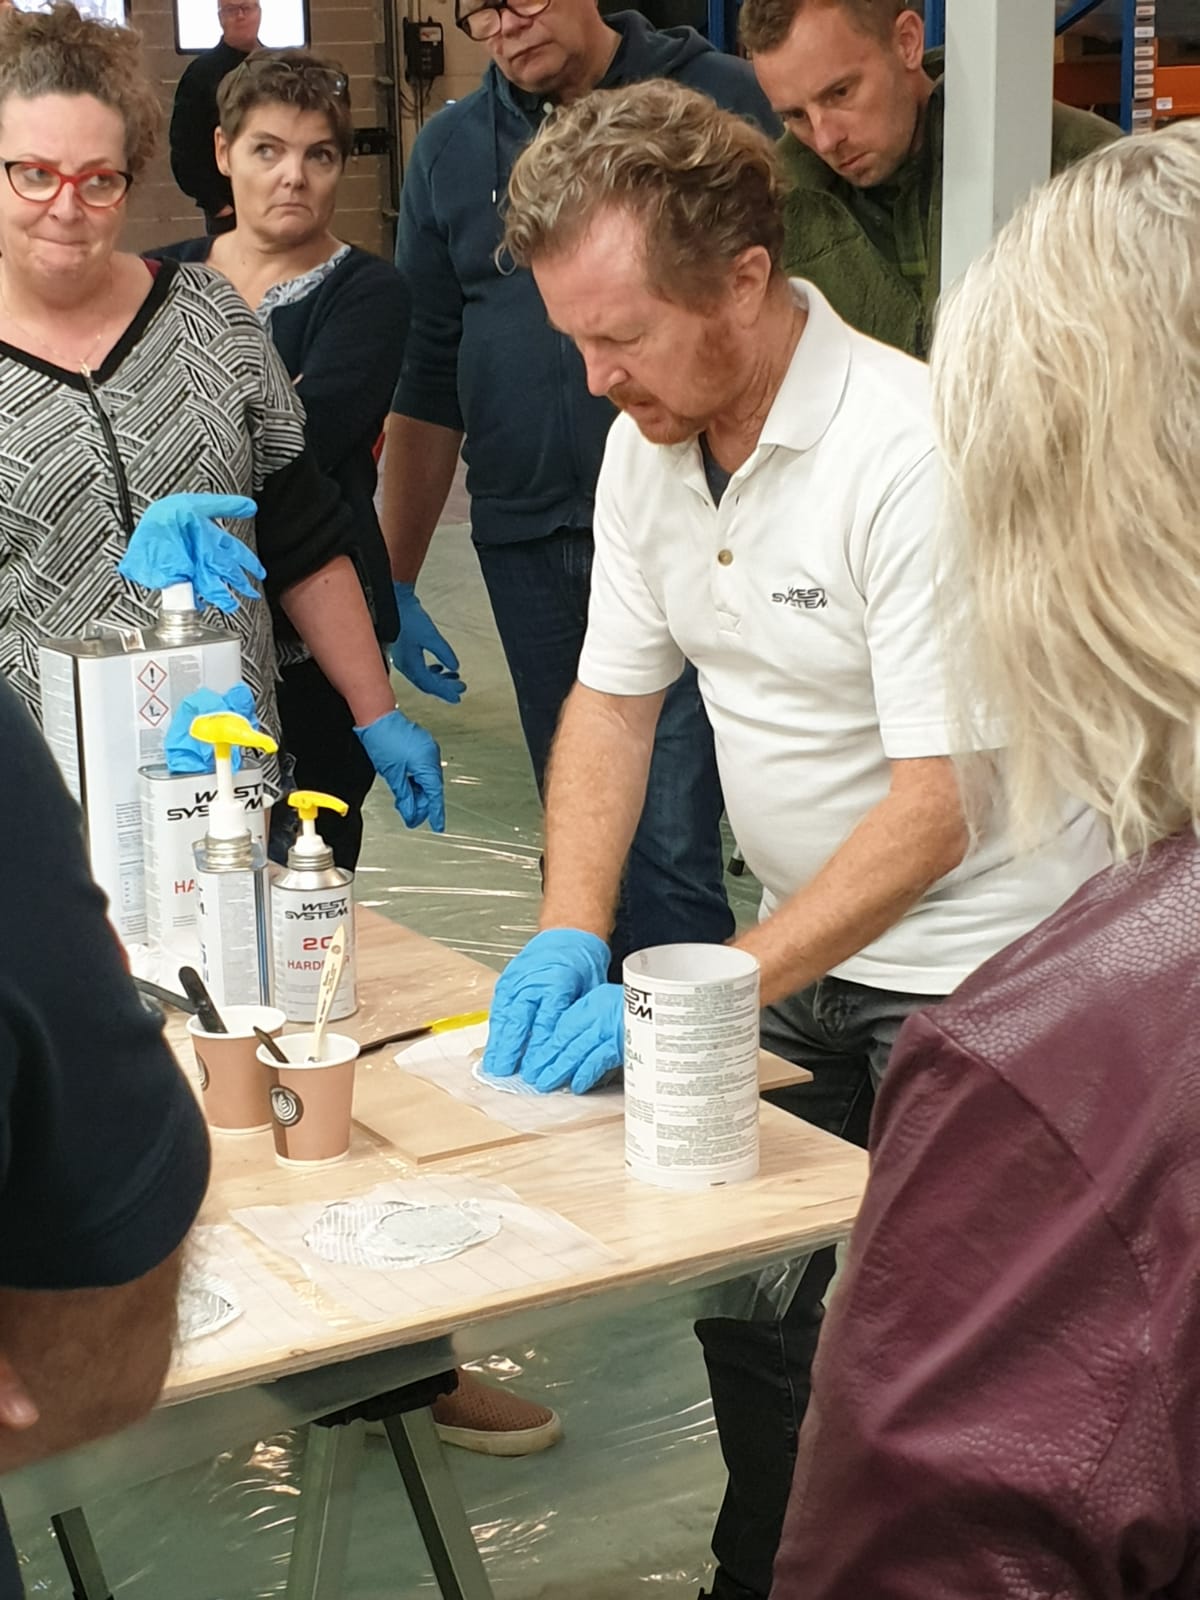 WEST SYSTEM Technical Team supports boat owners with ‘how to use epoxy’ demonstrations at Southampton International Boat Show